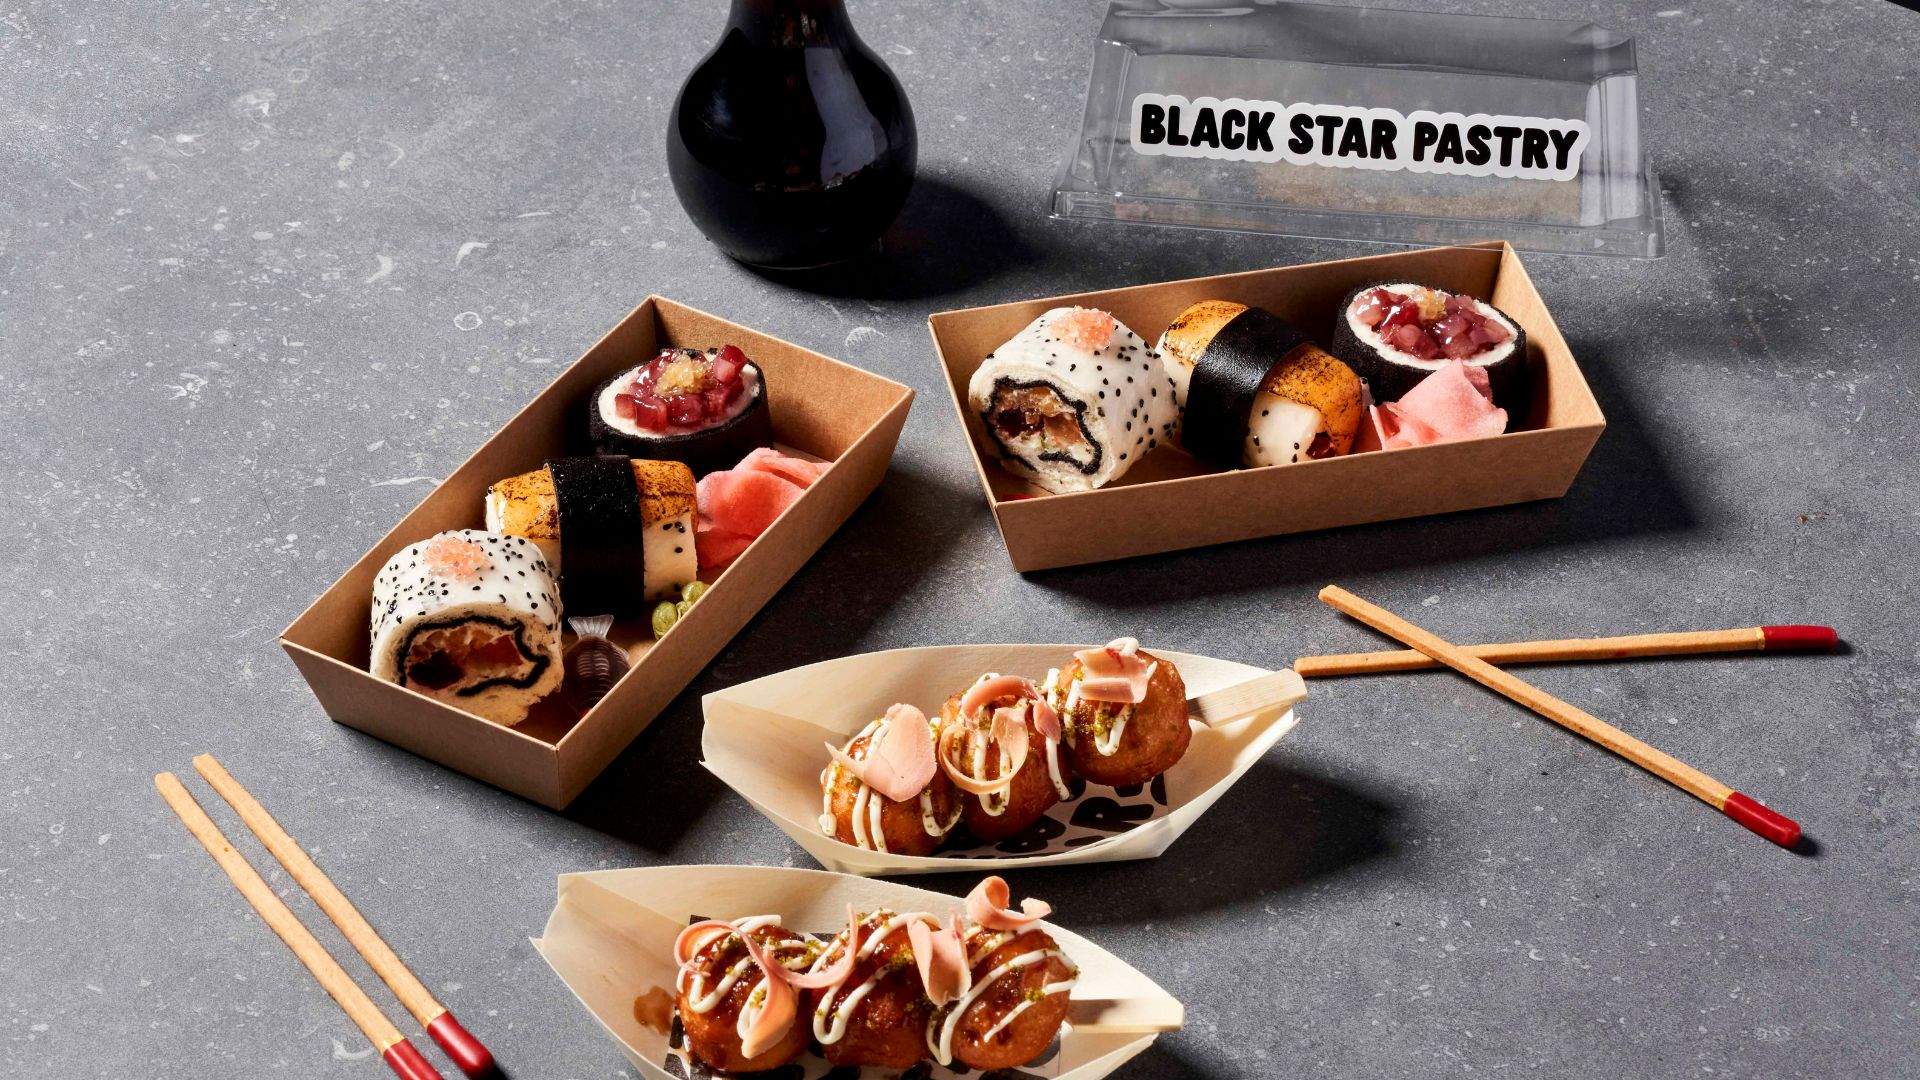 Genre-Bending Cuisine: Black Star Pastry Is Giving Its Rosebery Spot the Izakaya Treatment for an Entire Weekend